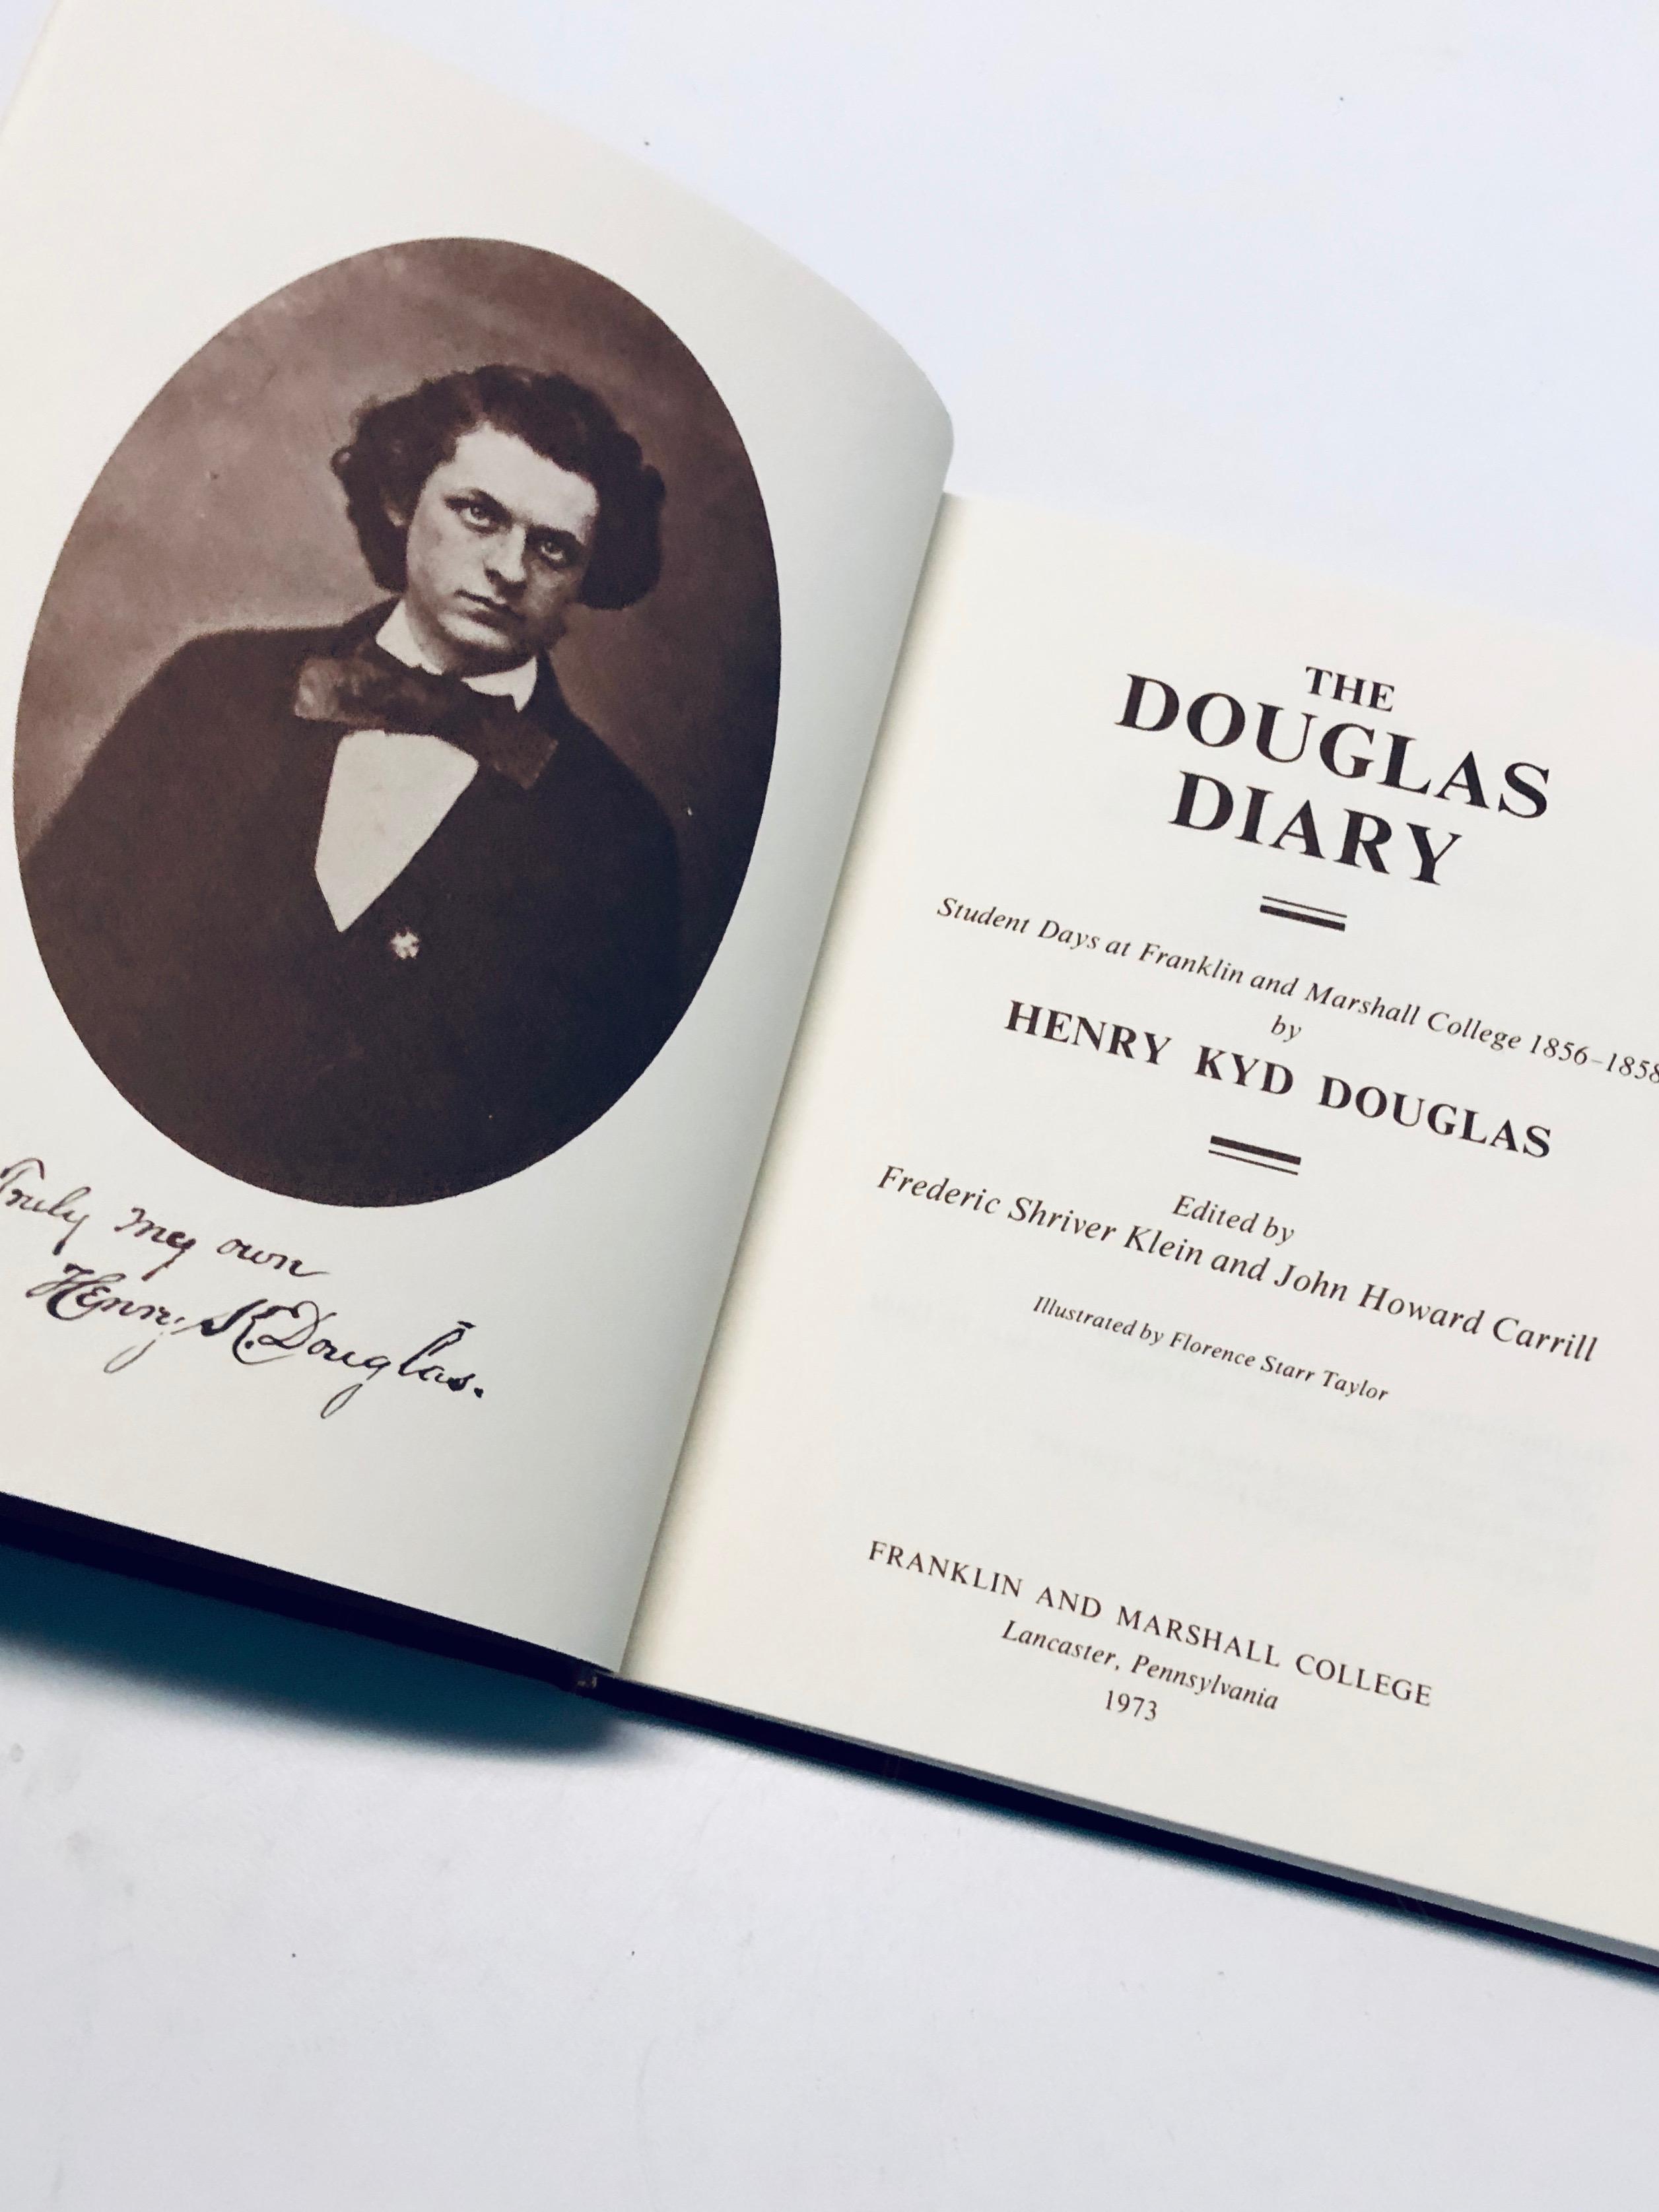 The Douglas Diary: Student Days at Franklin and Marshall College 1856 to 1858